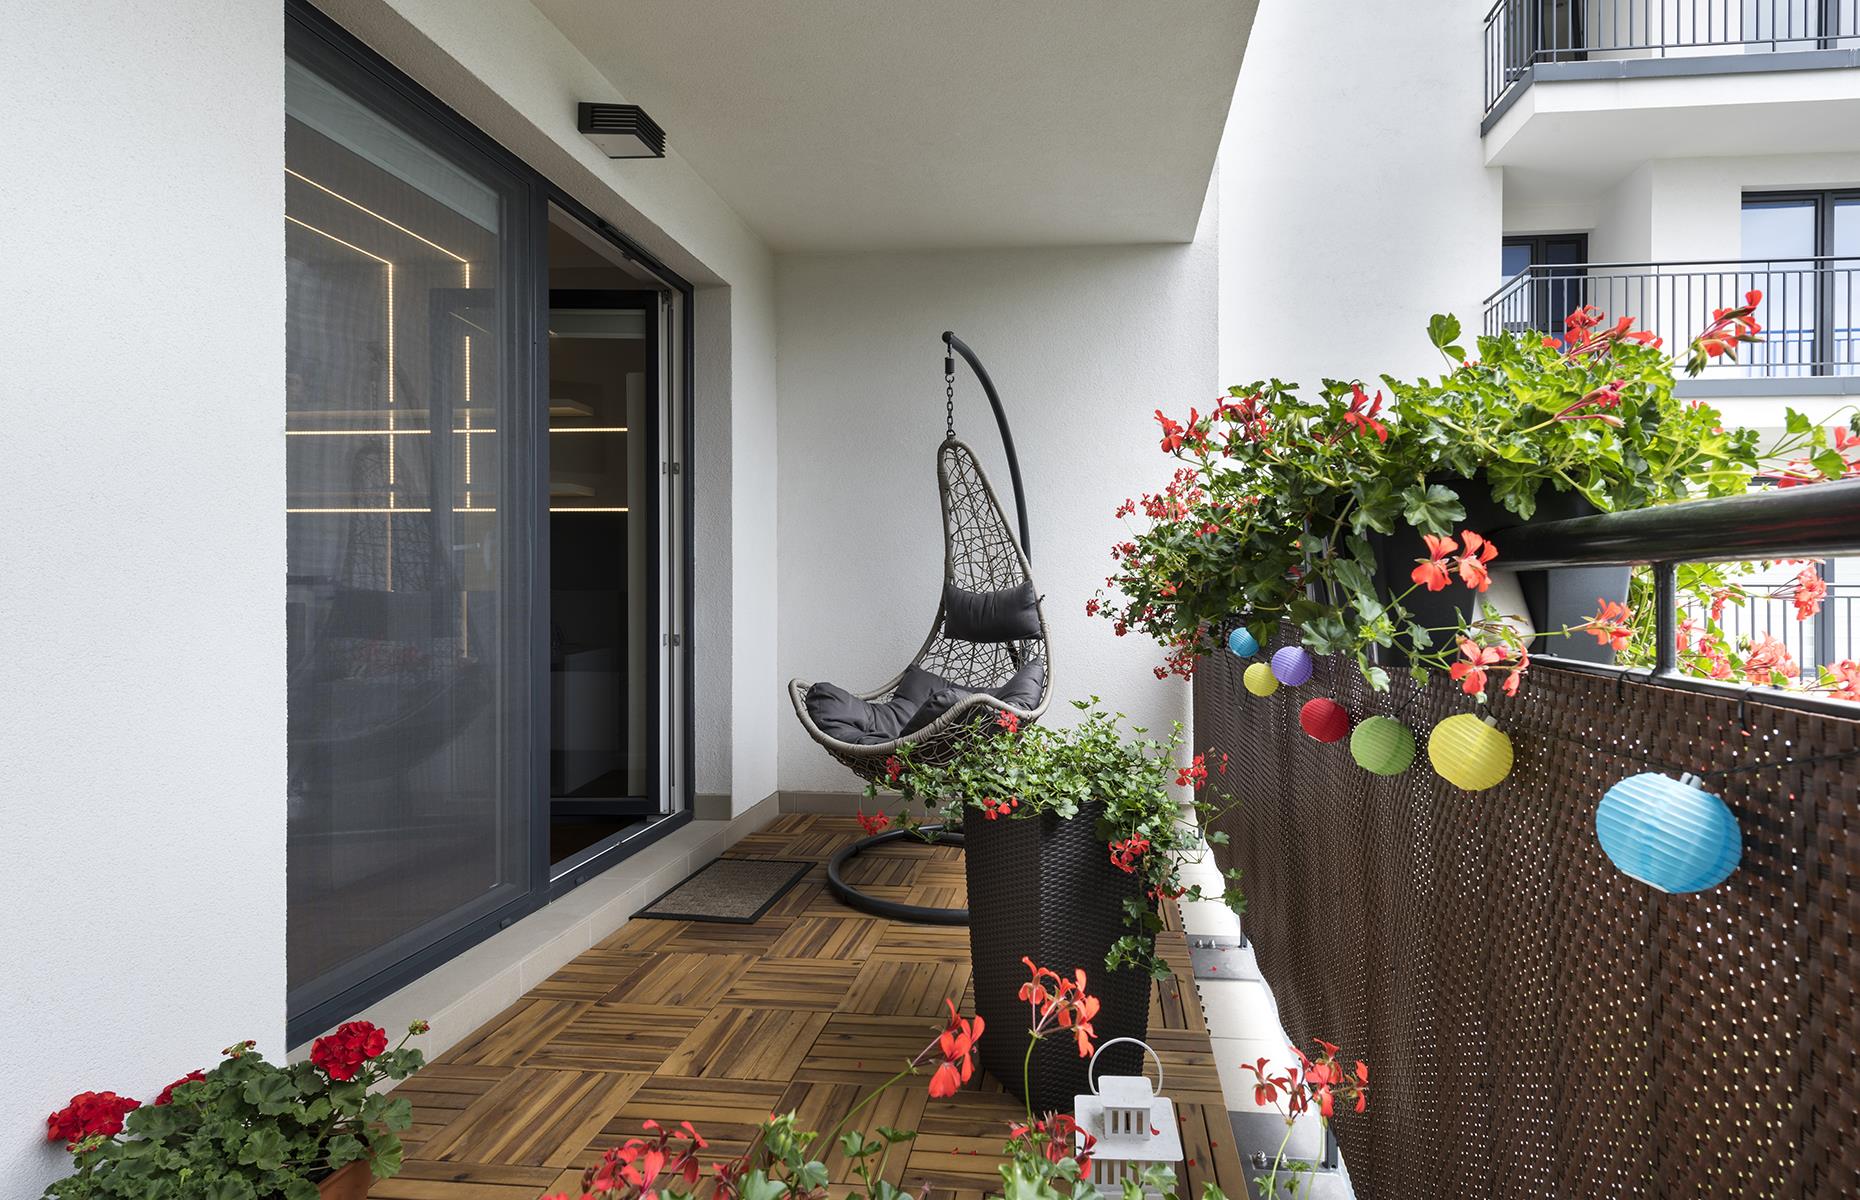 <p>If you don't have a yard, a <a href="https://www.loveproperty.com/gallerylist/74049/balcony-ideas-for-your-little-patch-of-paradise">beautiful balcony</a> is the next best thing, giving you the easy option of walking straight out into nature and fresh air. Bonus points if it's decorated with plants or you have an easy chair perfect for reading in the afternoon sun. </p>